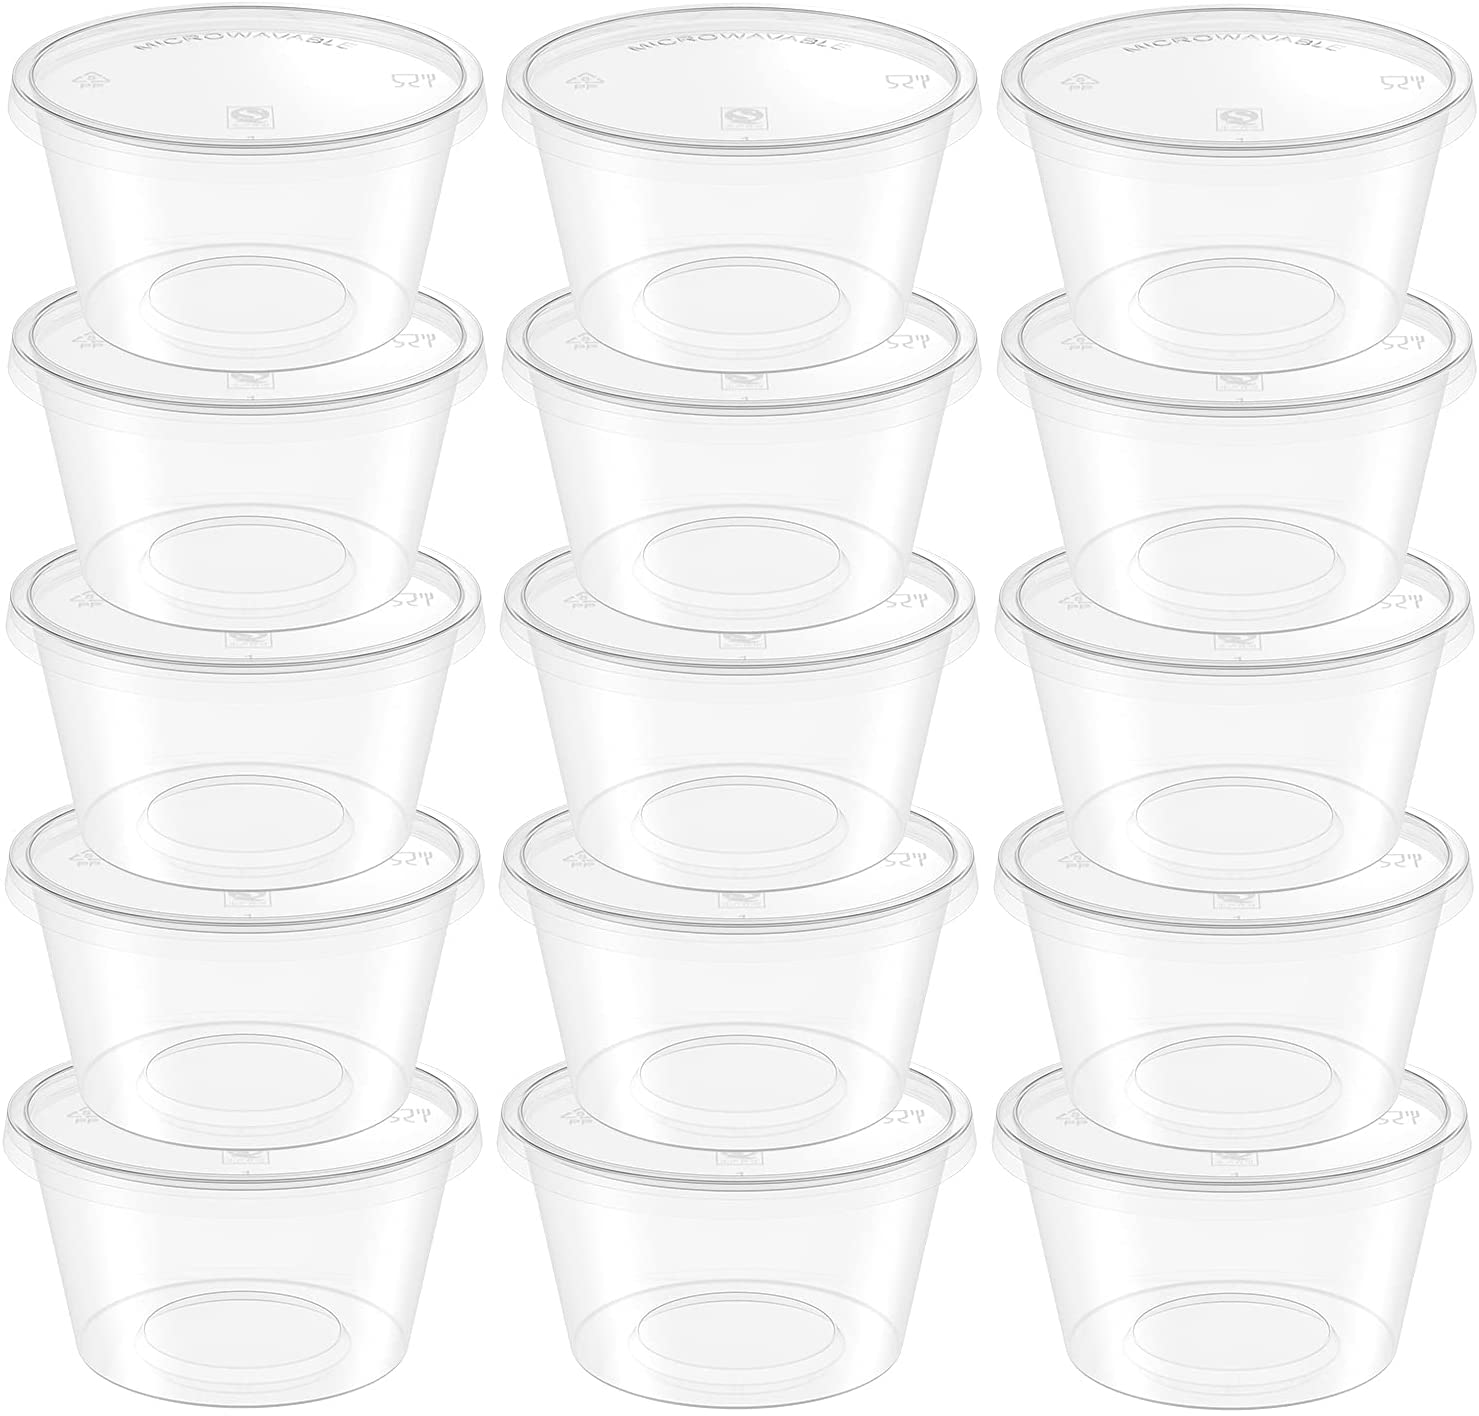 Hesroicy 12Pcs Clear Slime Storage Round Plastic Box Container Foam Ball  Cups with Lids 